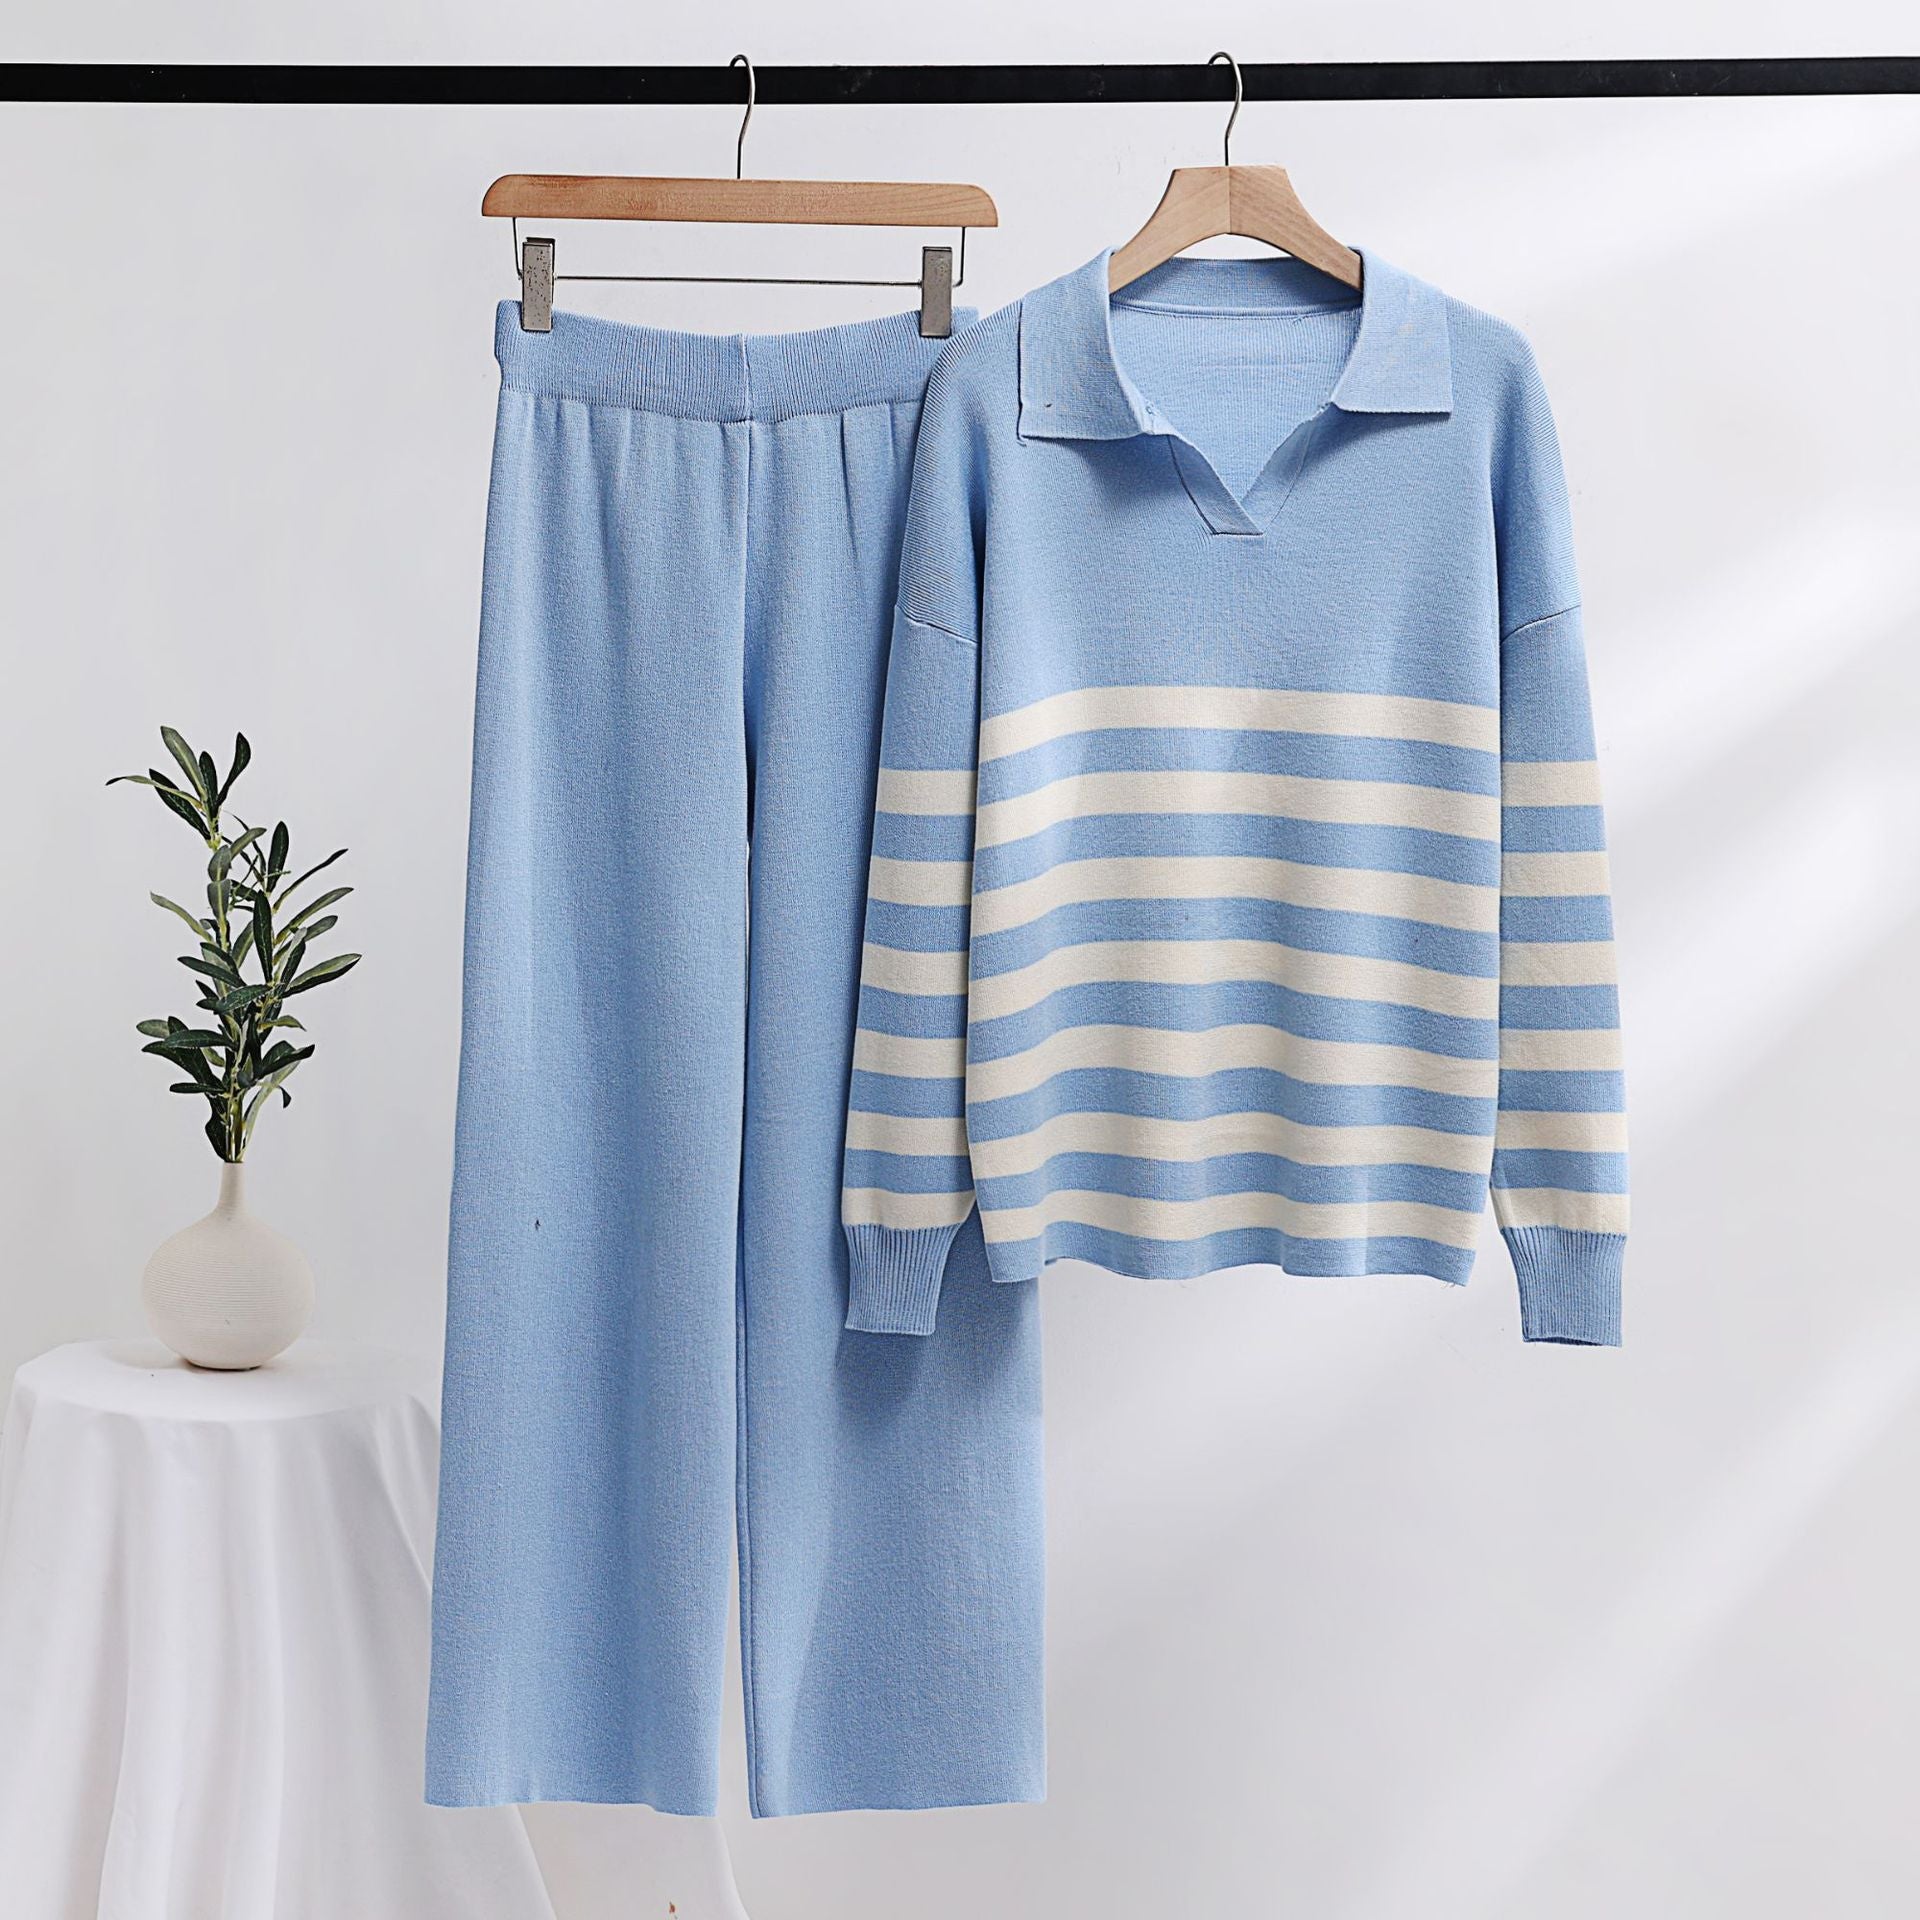 Knitting Suit Polo Collar Striped Sweater Loose Casual Two Piece Set Women Clothing